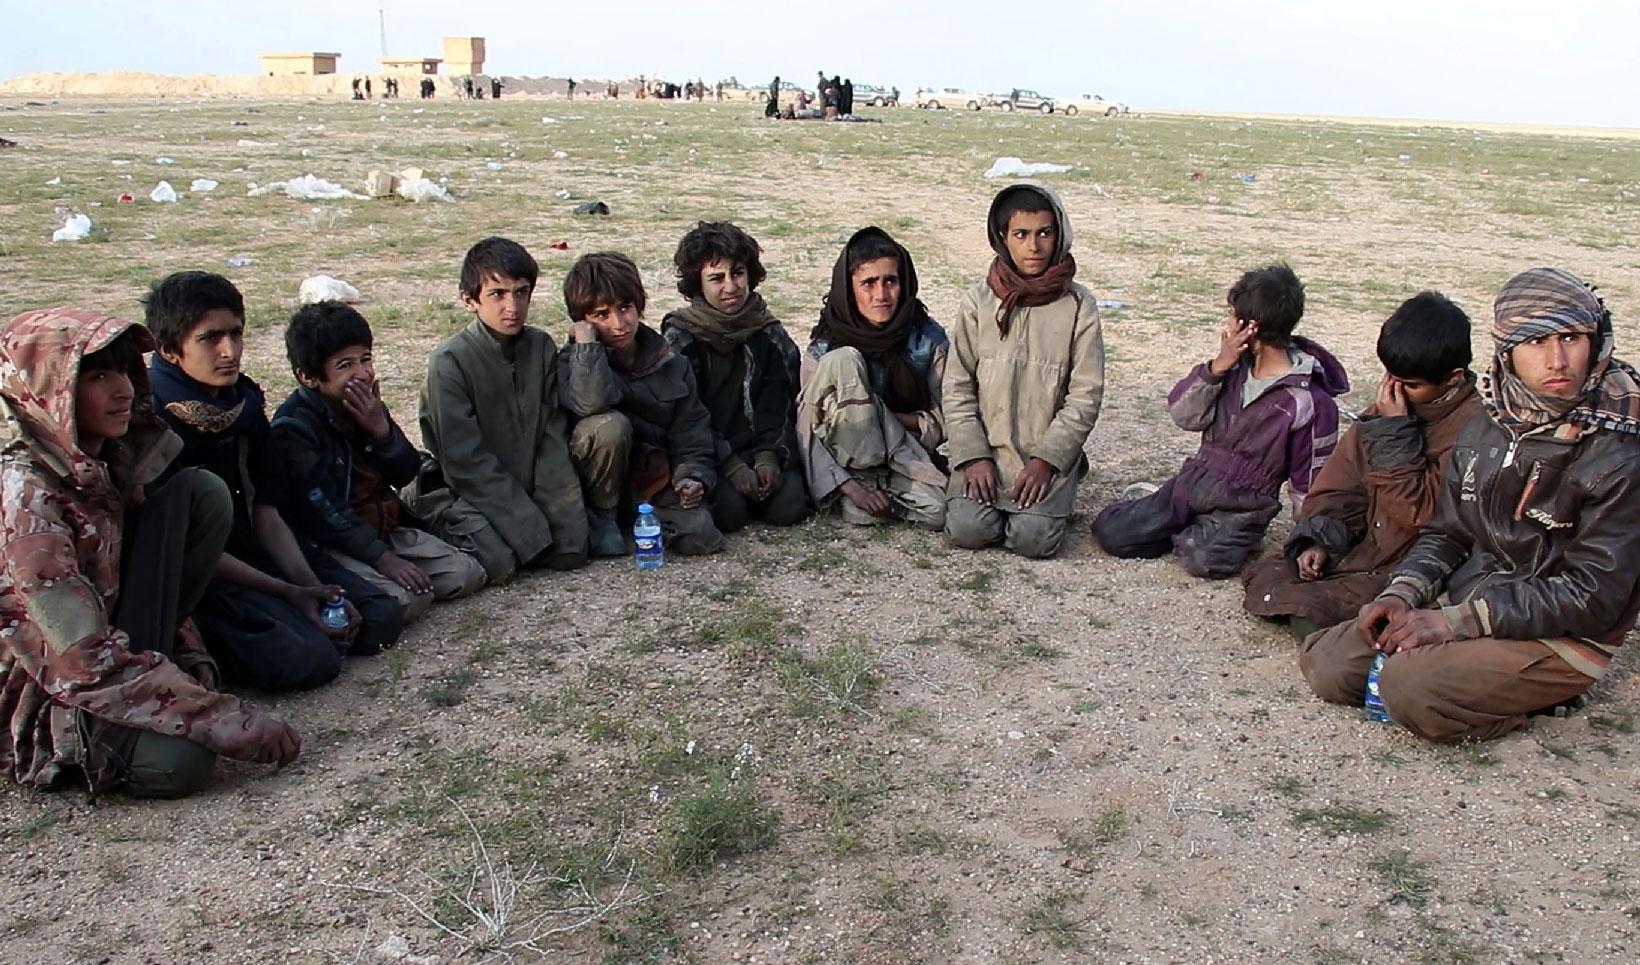 Saddam, (R) a 15 year old Yazidi boy and ten other Yazidi children gather in a area held by the US-backed Kurdish-led Syrian Democratic Forces (SDF), in the eastern Syrian province of Deir Ezzor, after fleeing the Islamic State (IS) group's embattled holdout of Baghouz, on February 23, 2019.Saddam, (R) a 15 year old Yezidi boy and ten other Yezidi children gather in a area held by the US-backed Kurdish-led Syrian Democratic Forces (SDF), in the eastern Syrian province of Deir Ezzor, after fleeing the Islami